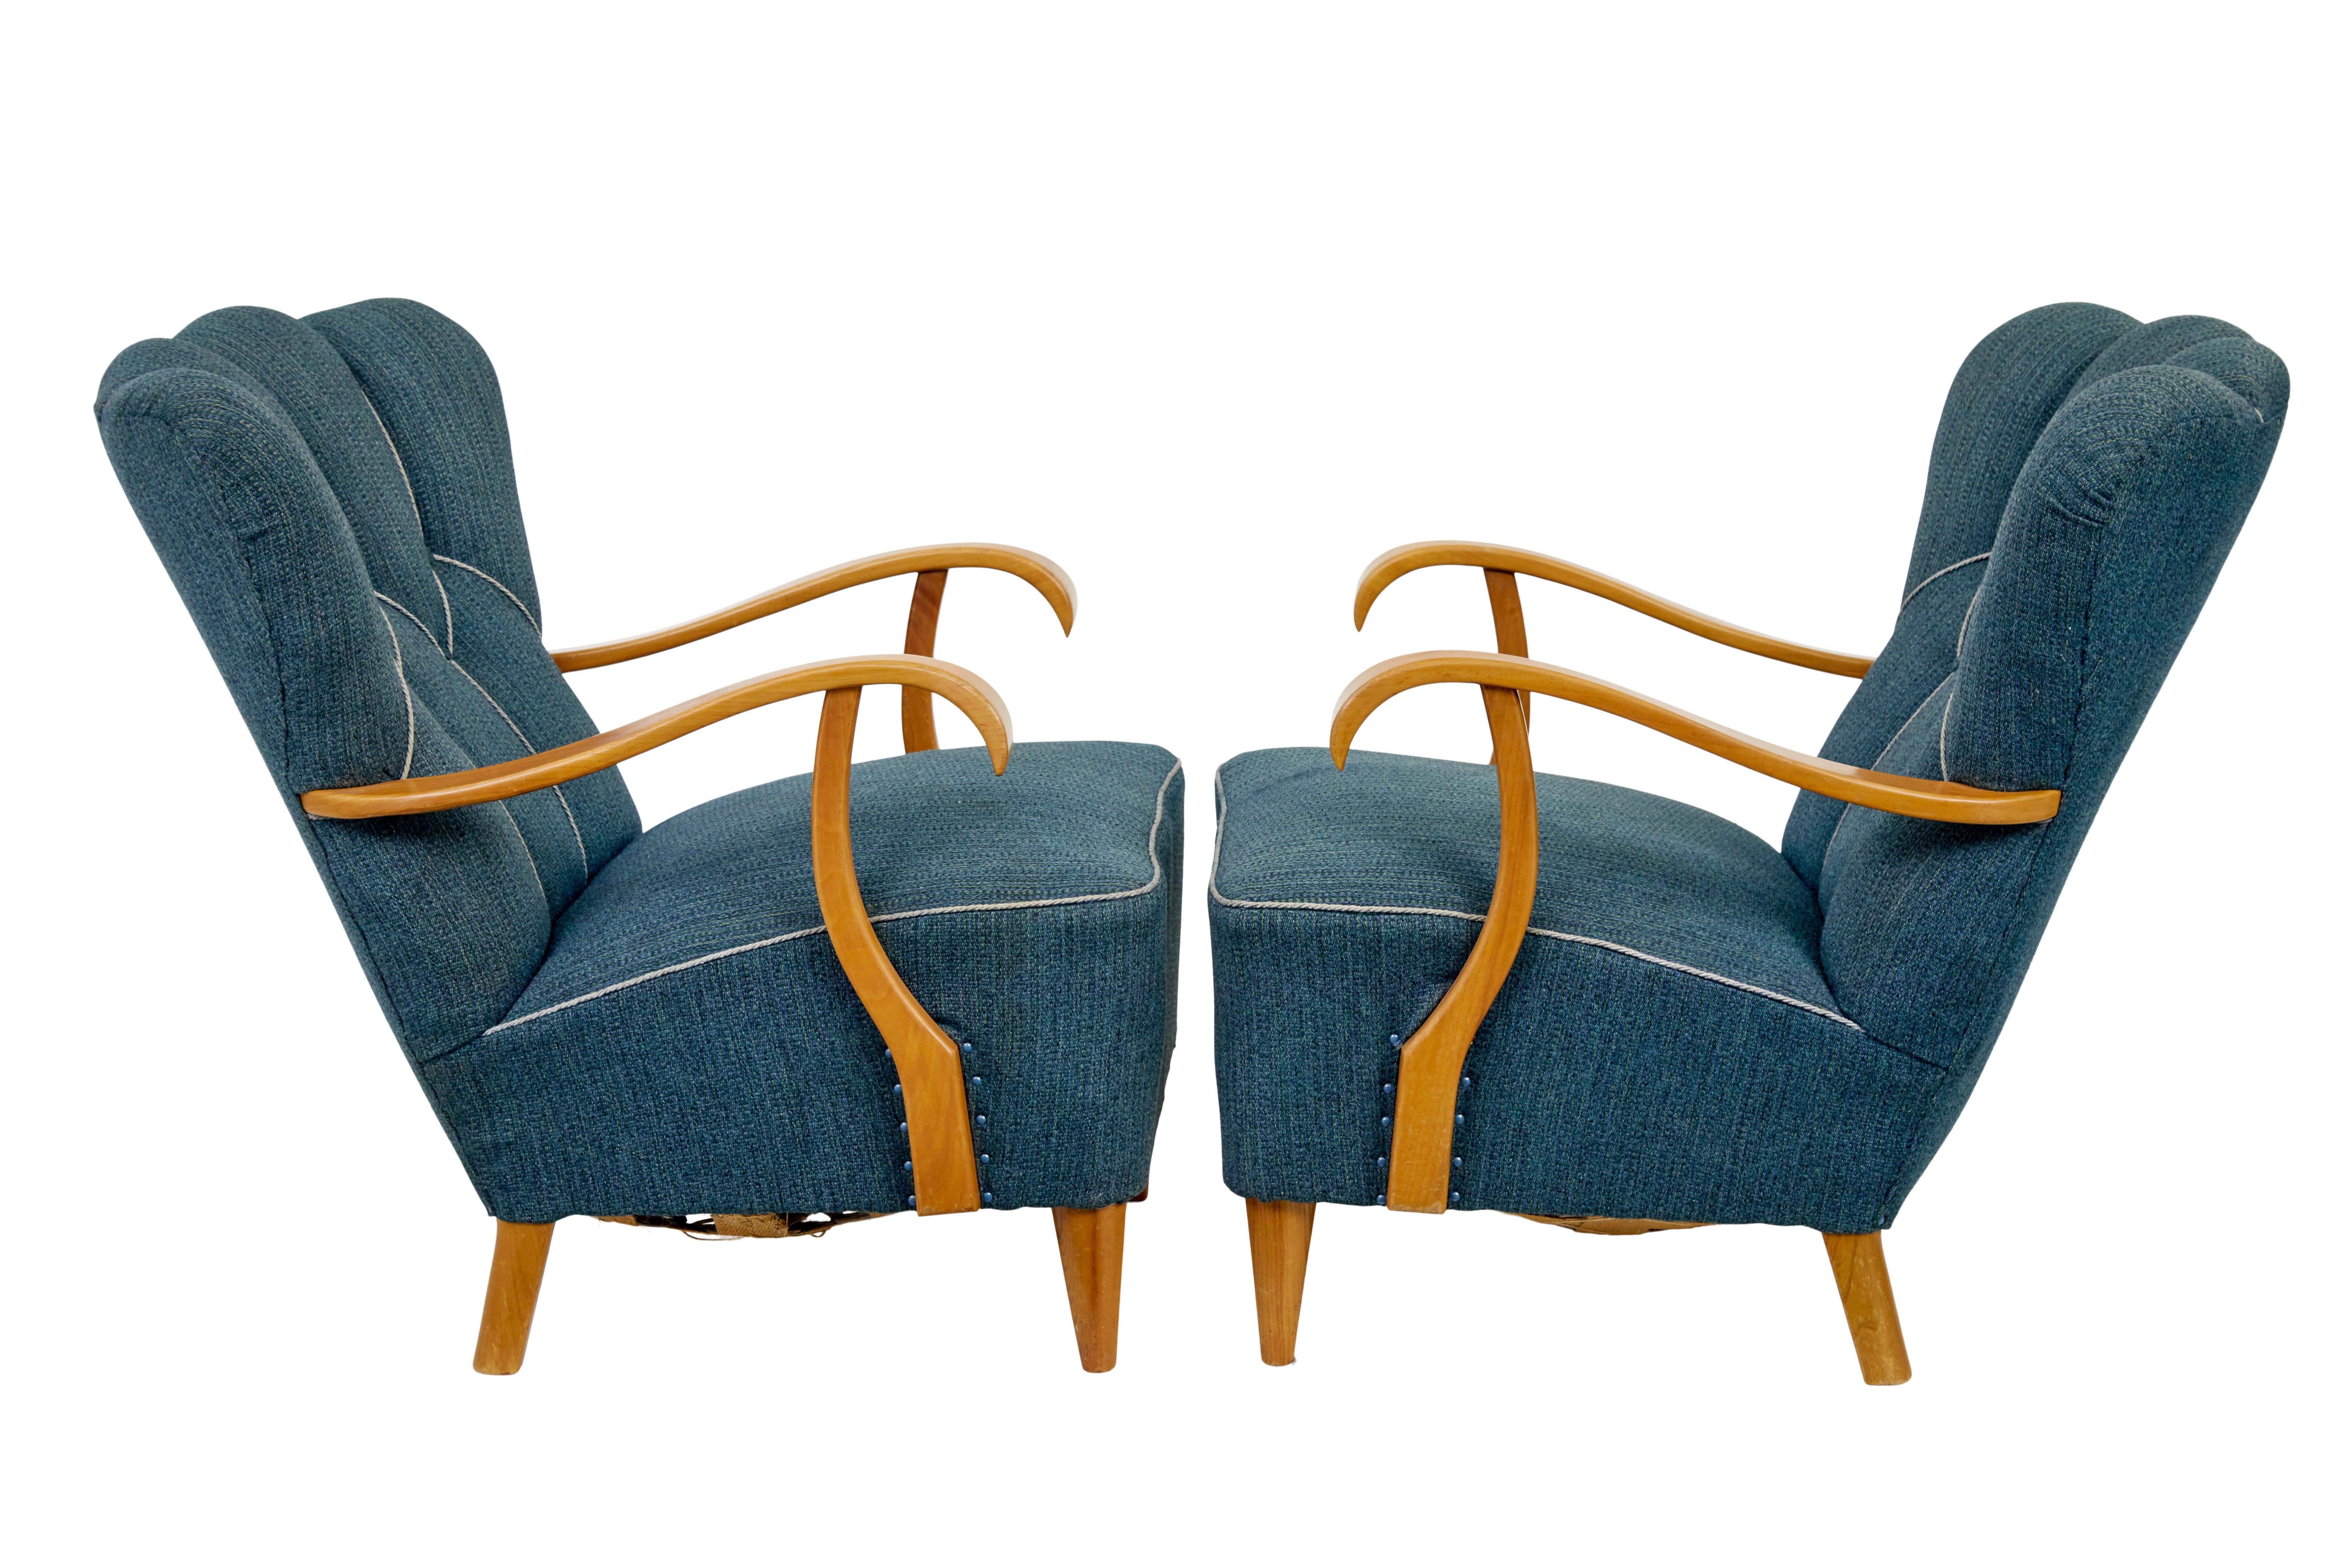 Hand-Crafted Pair of Scandinavian 1950’s shell back armchairs For Sale